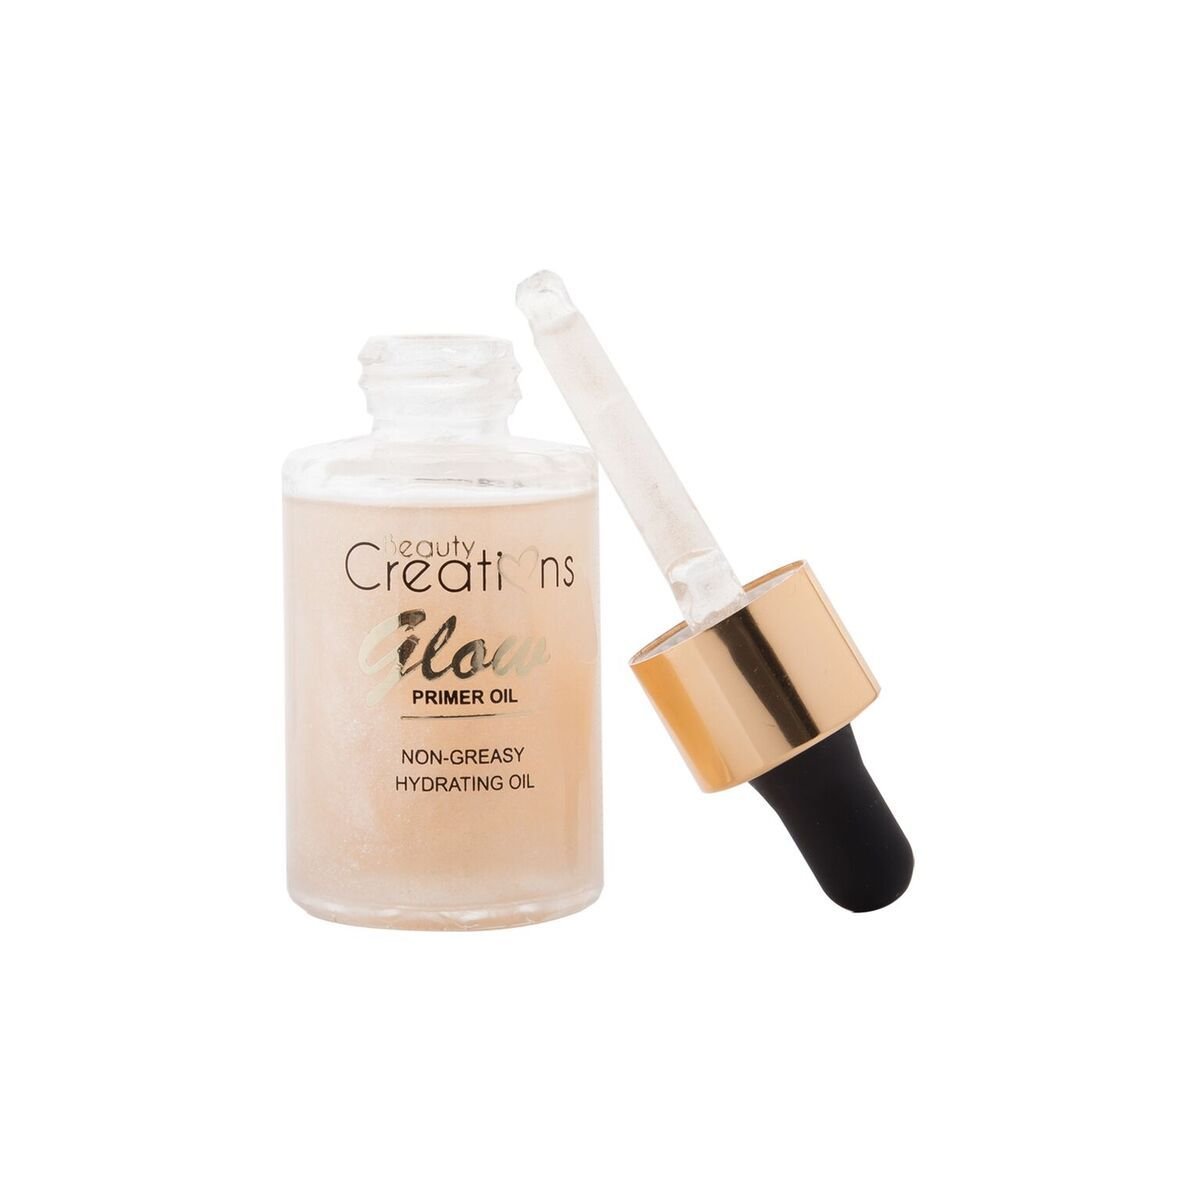 Beauty Creations Glow Primer Oil (Non-Greasy, Hydrating Oil)